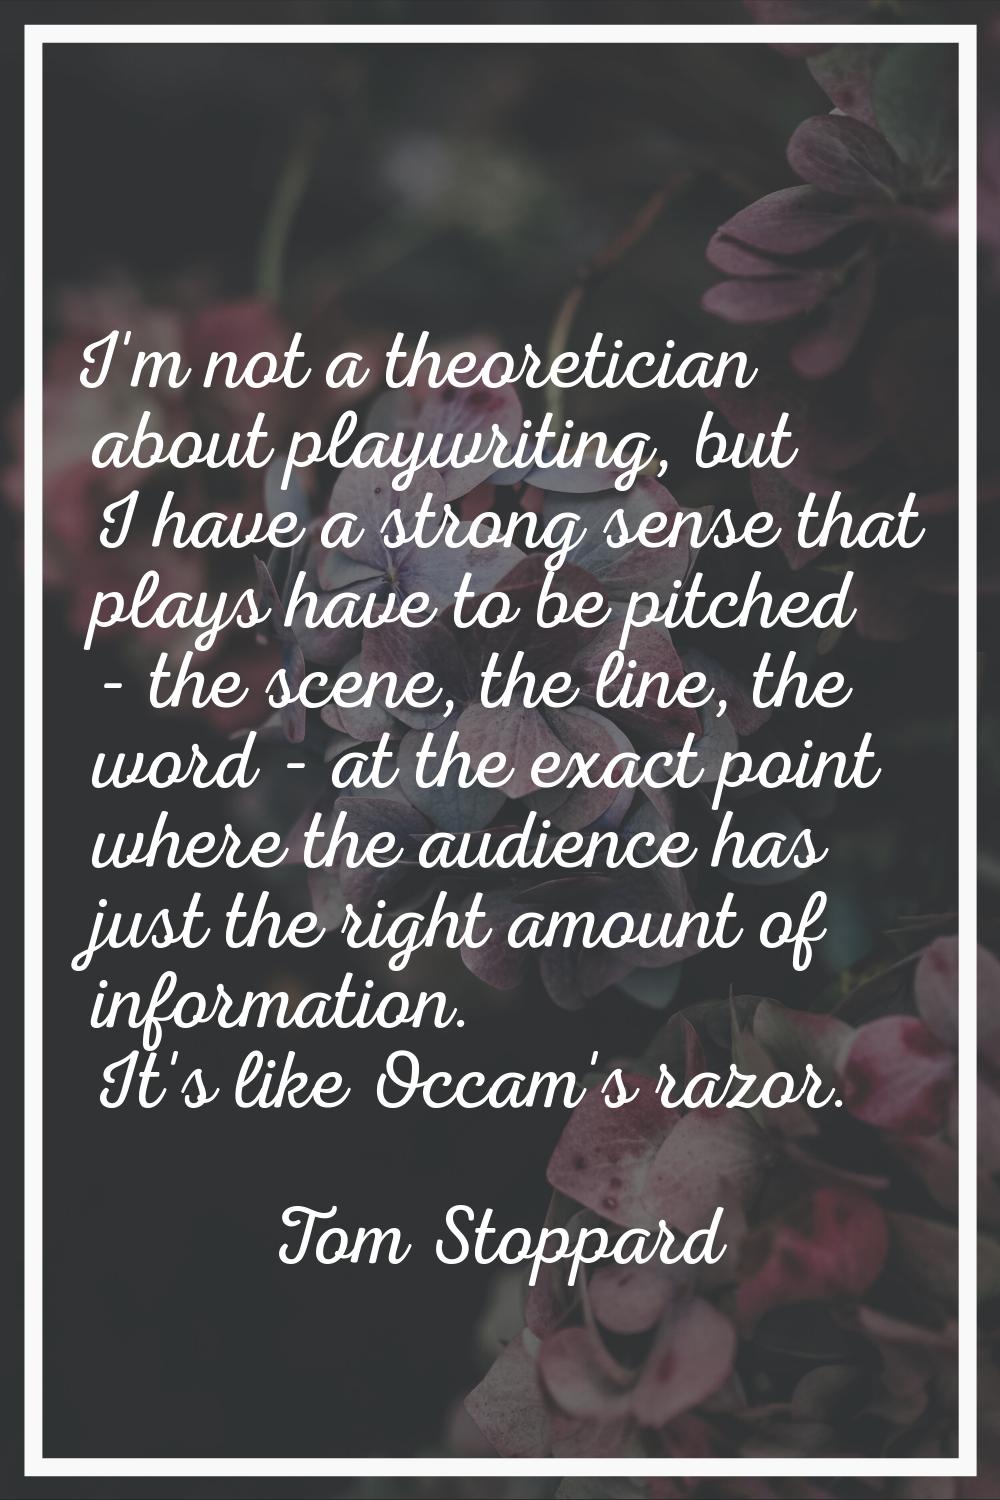 I'm not a theoretician about playwriting, but I have a strong sense that plays have to be pitched -